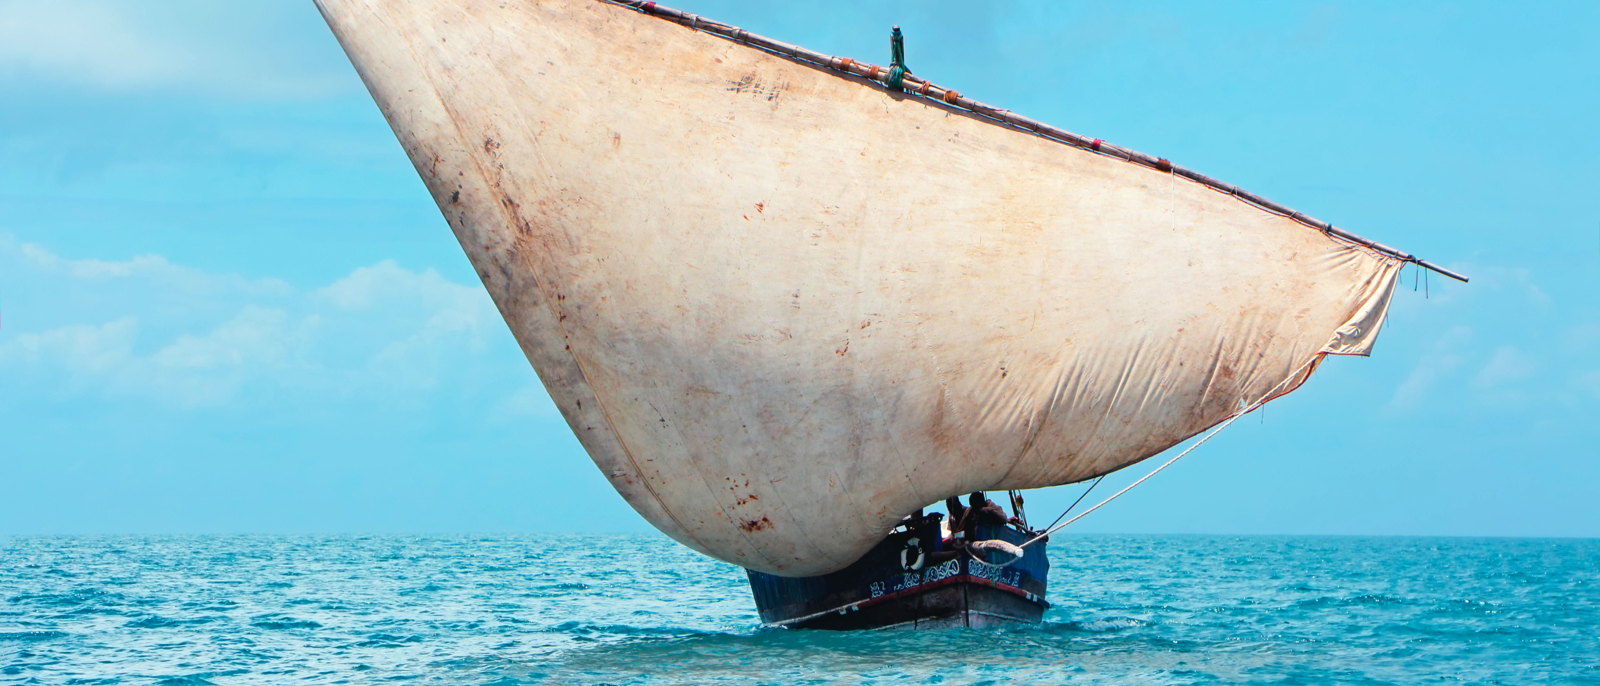 Wooden sailboat (dhow) on the open sea with clouds, Zanzibar